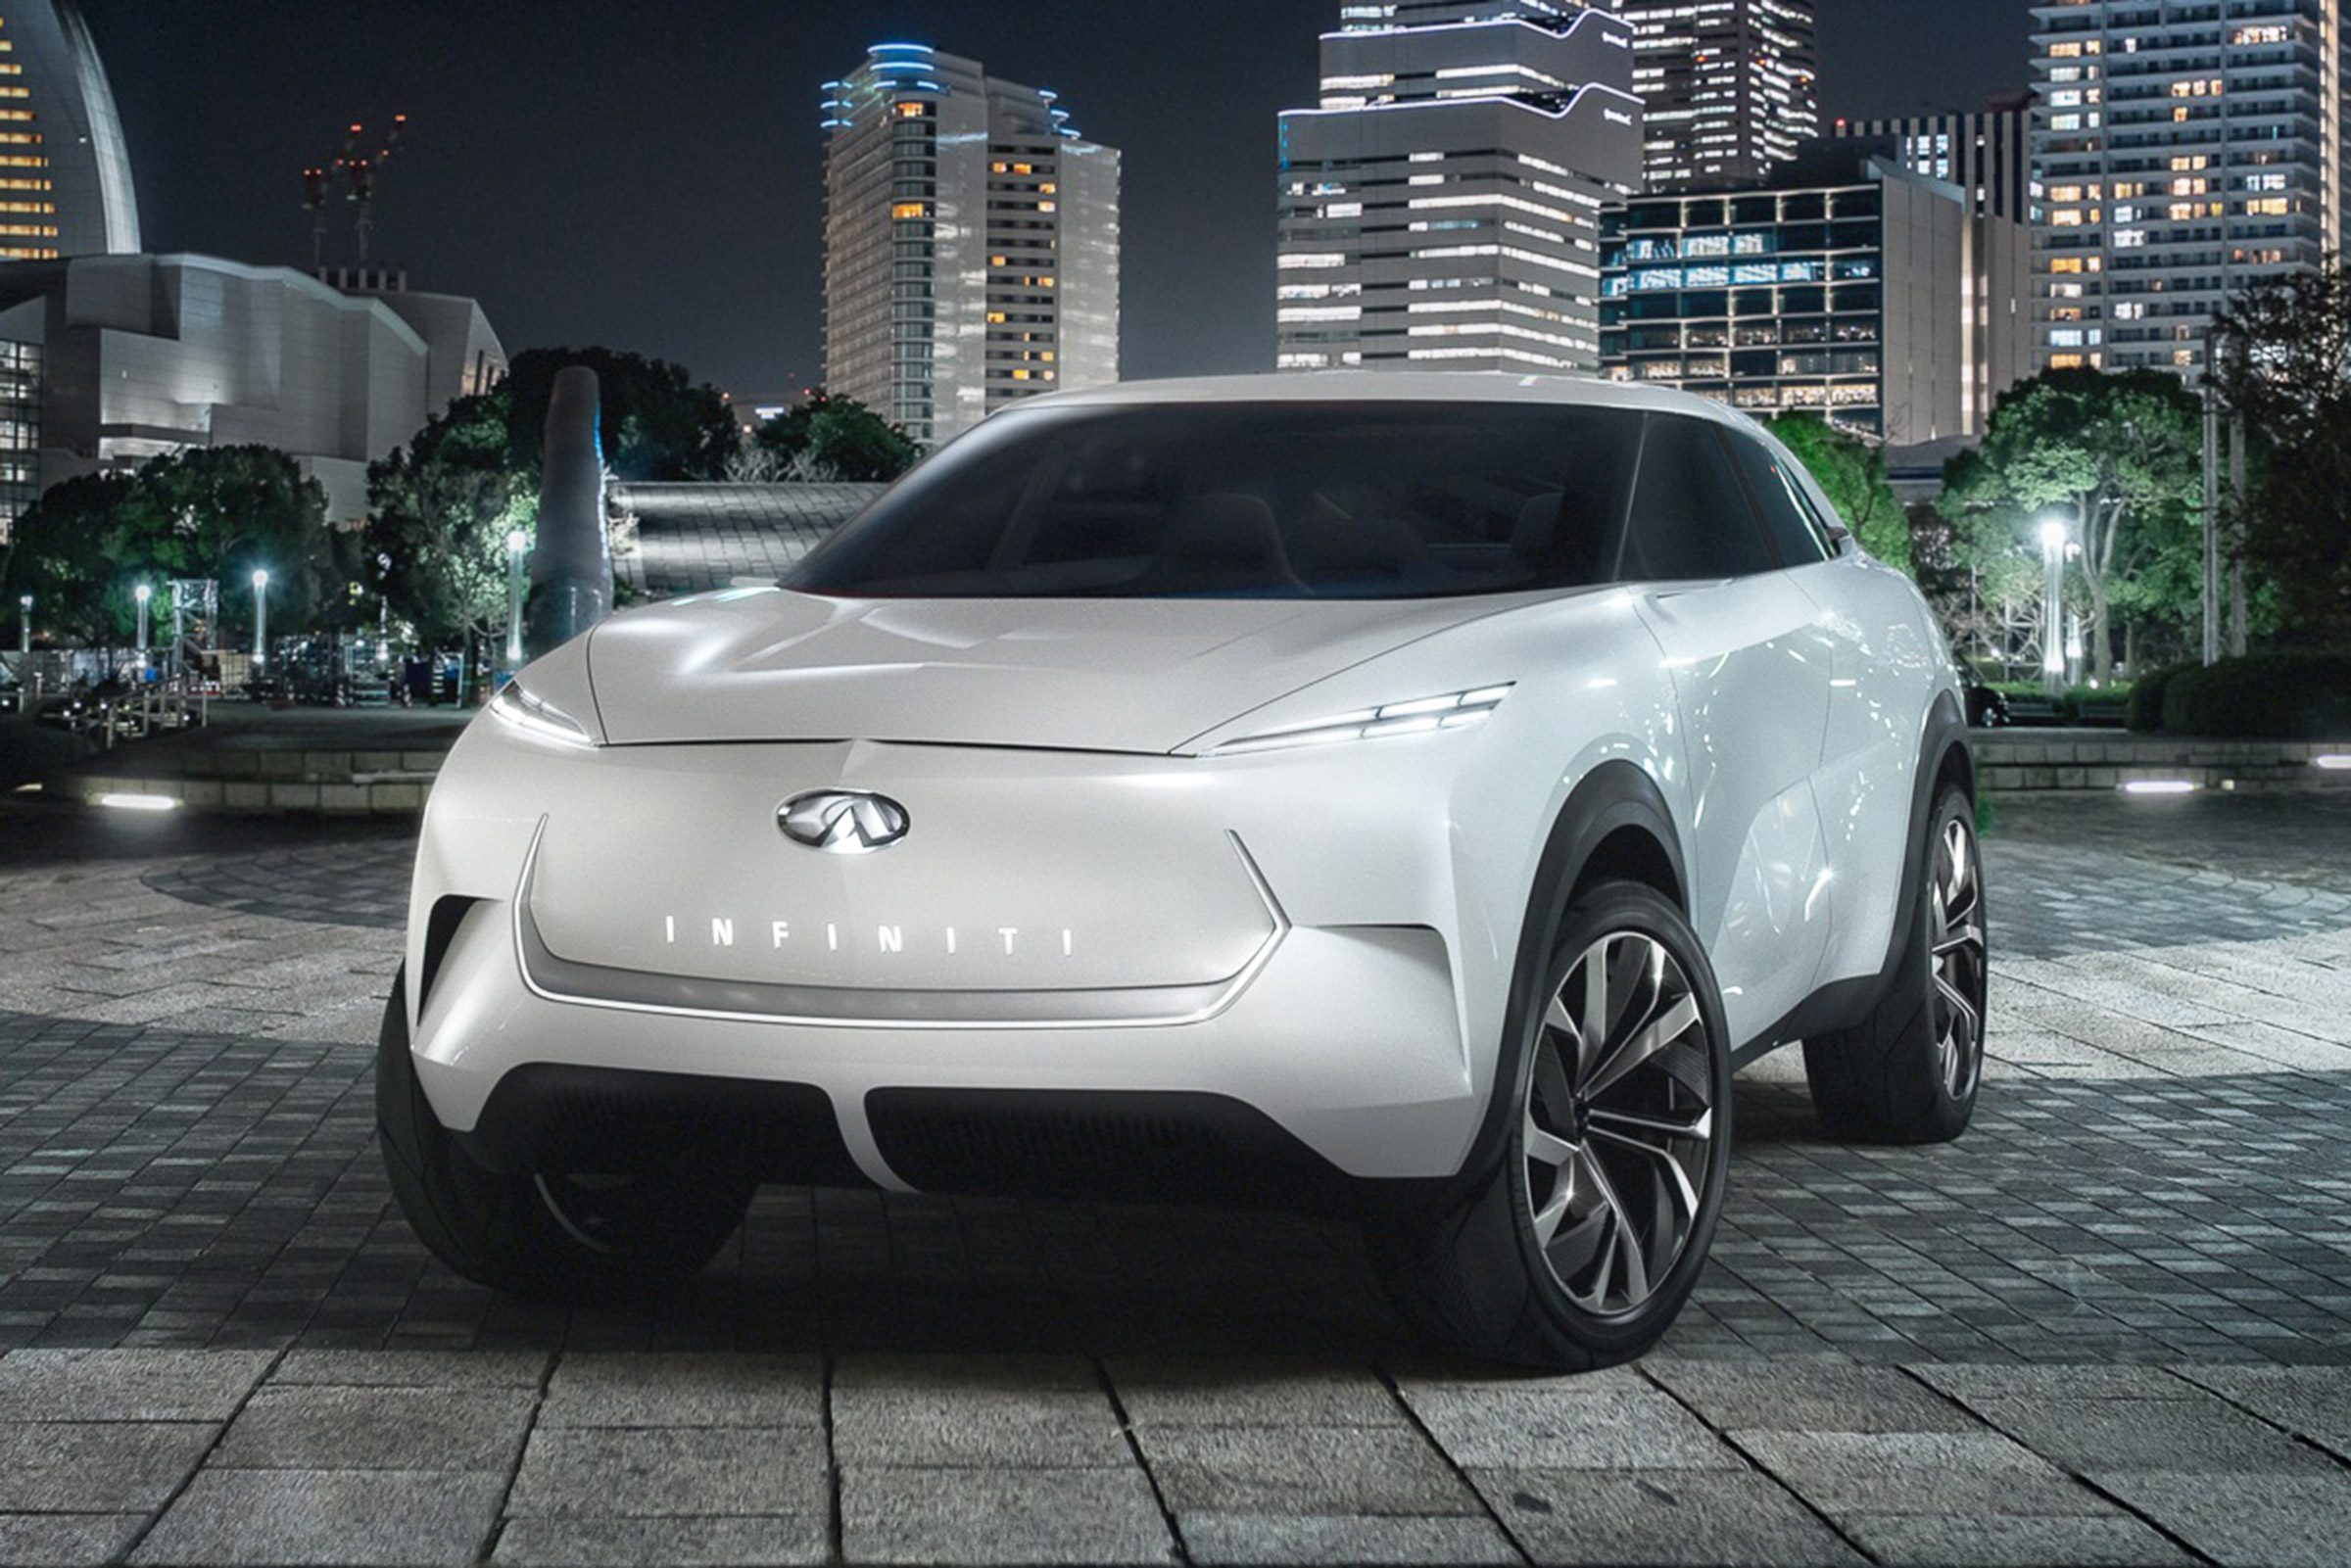 New Infiniti QX Inspiration concept revealed ahead of Detroit debut